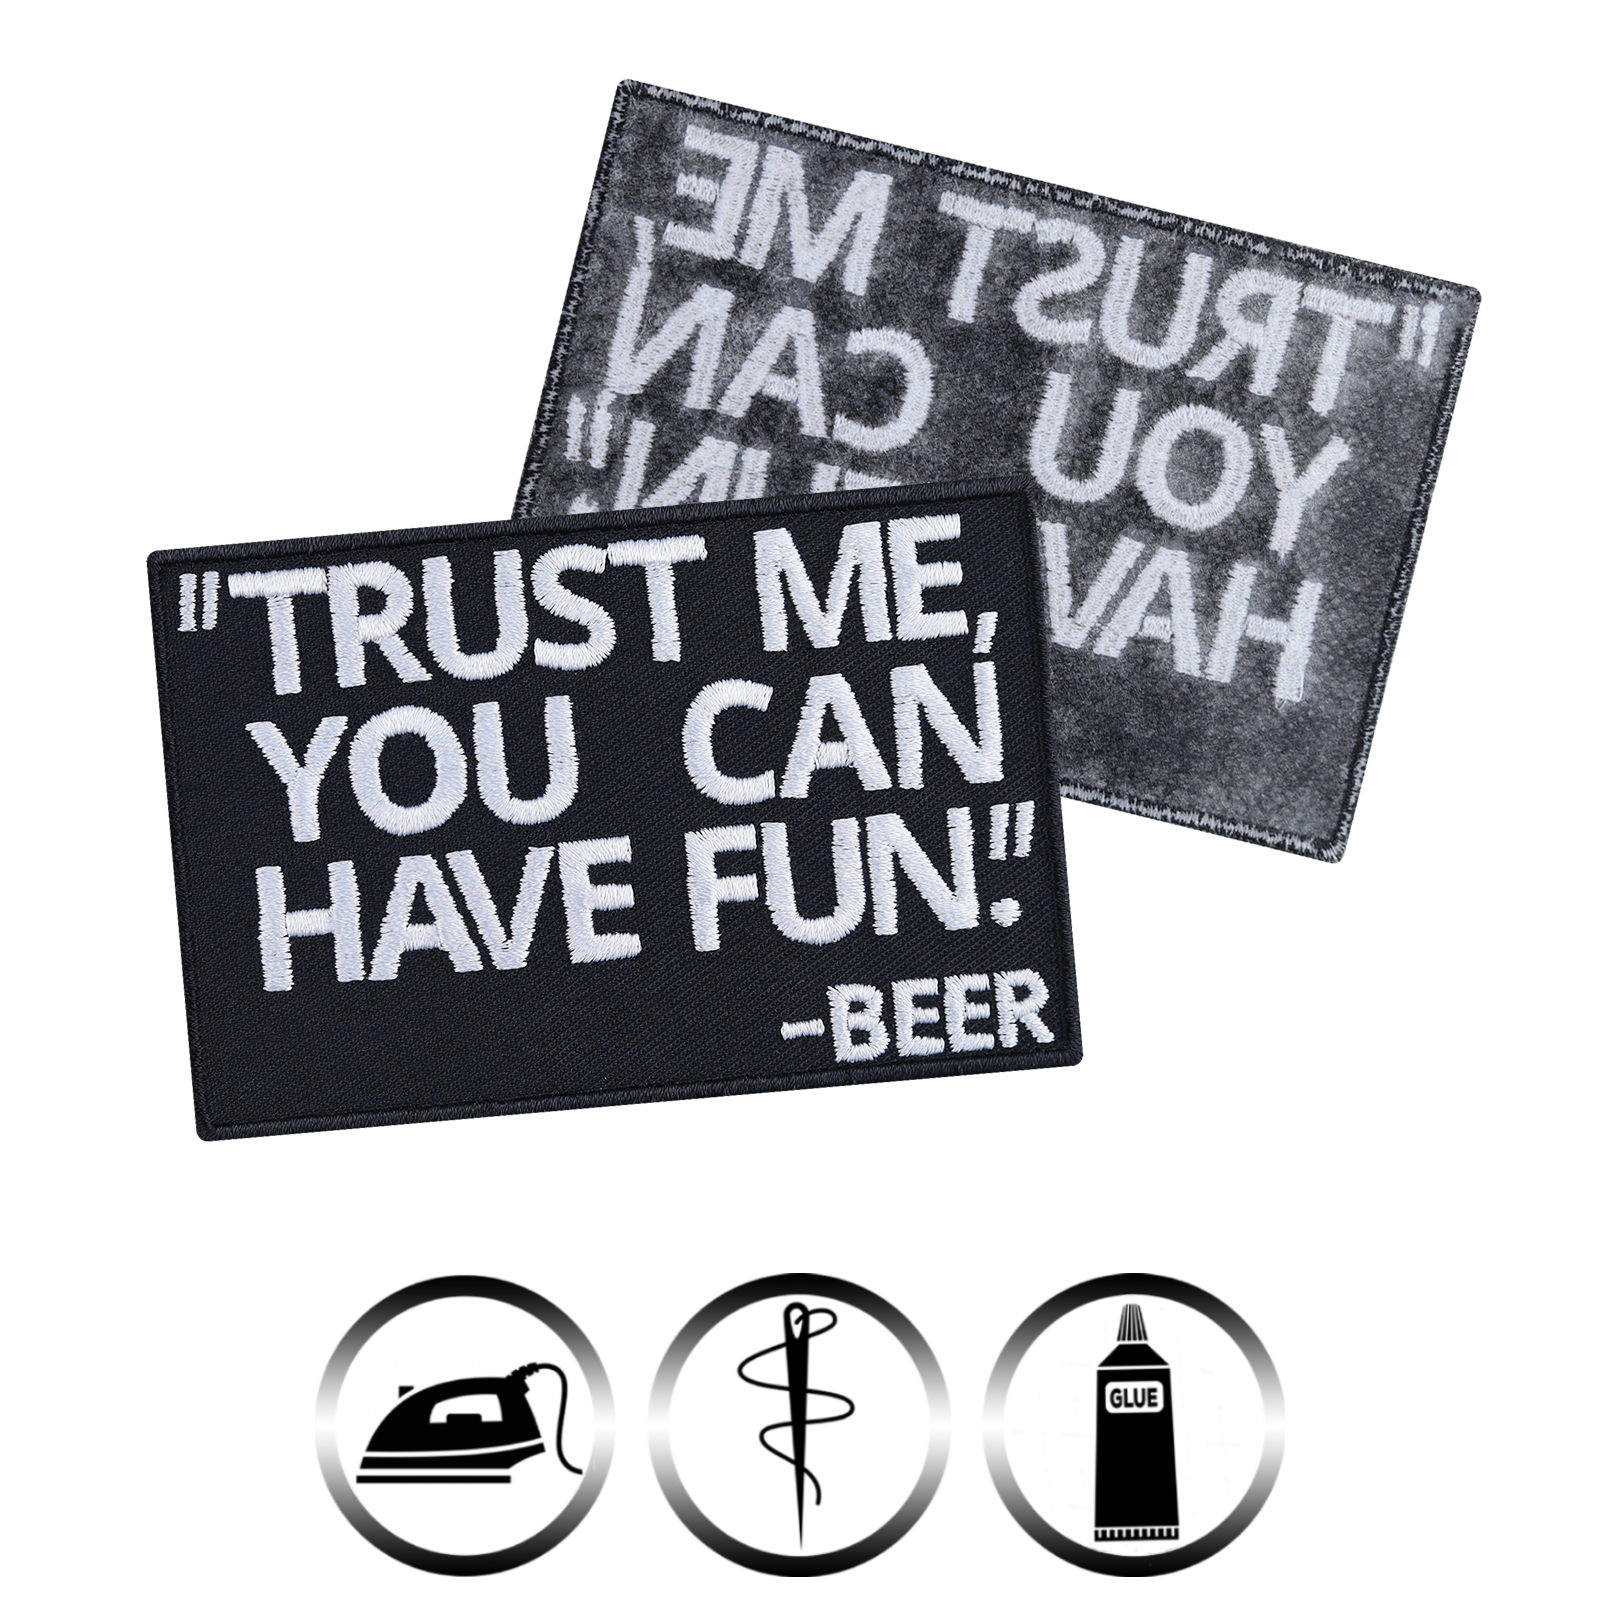 Trust me you can have fun. (beer) - Patch